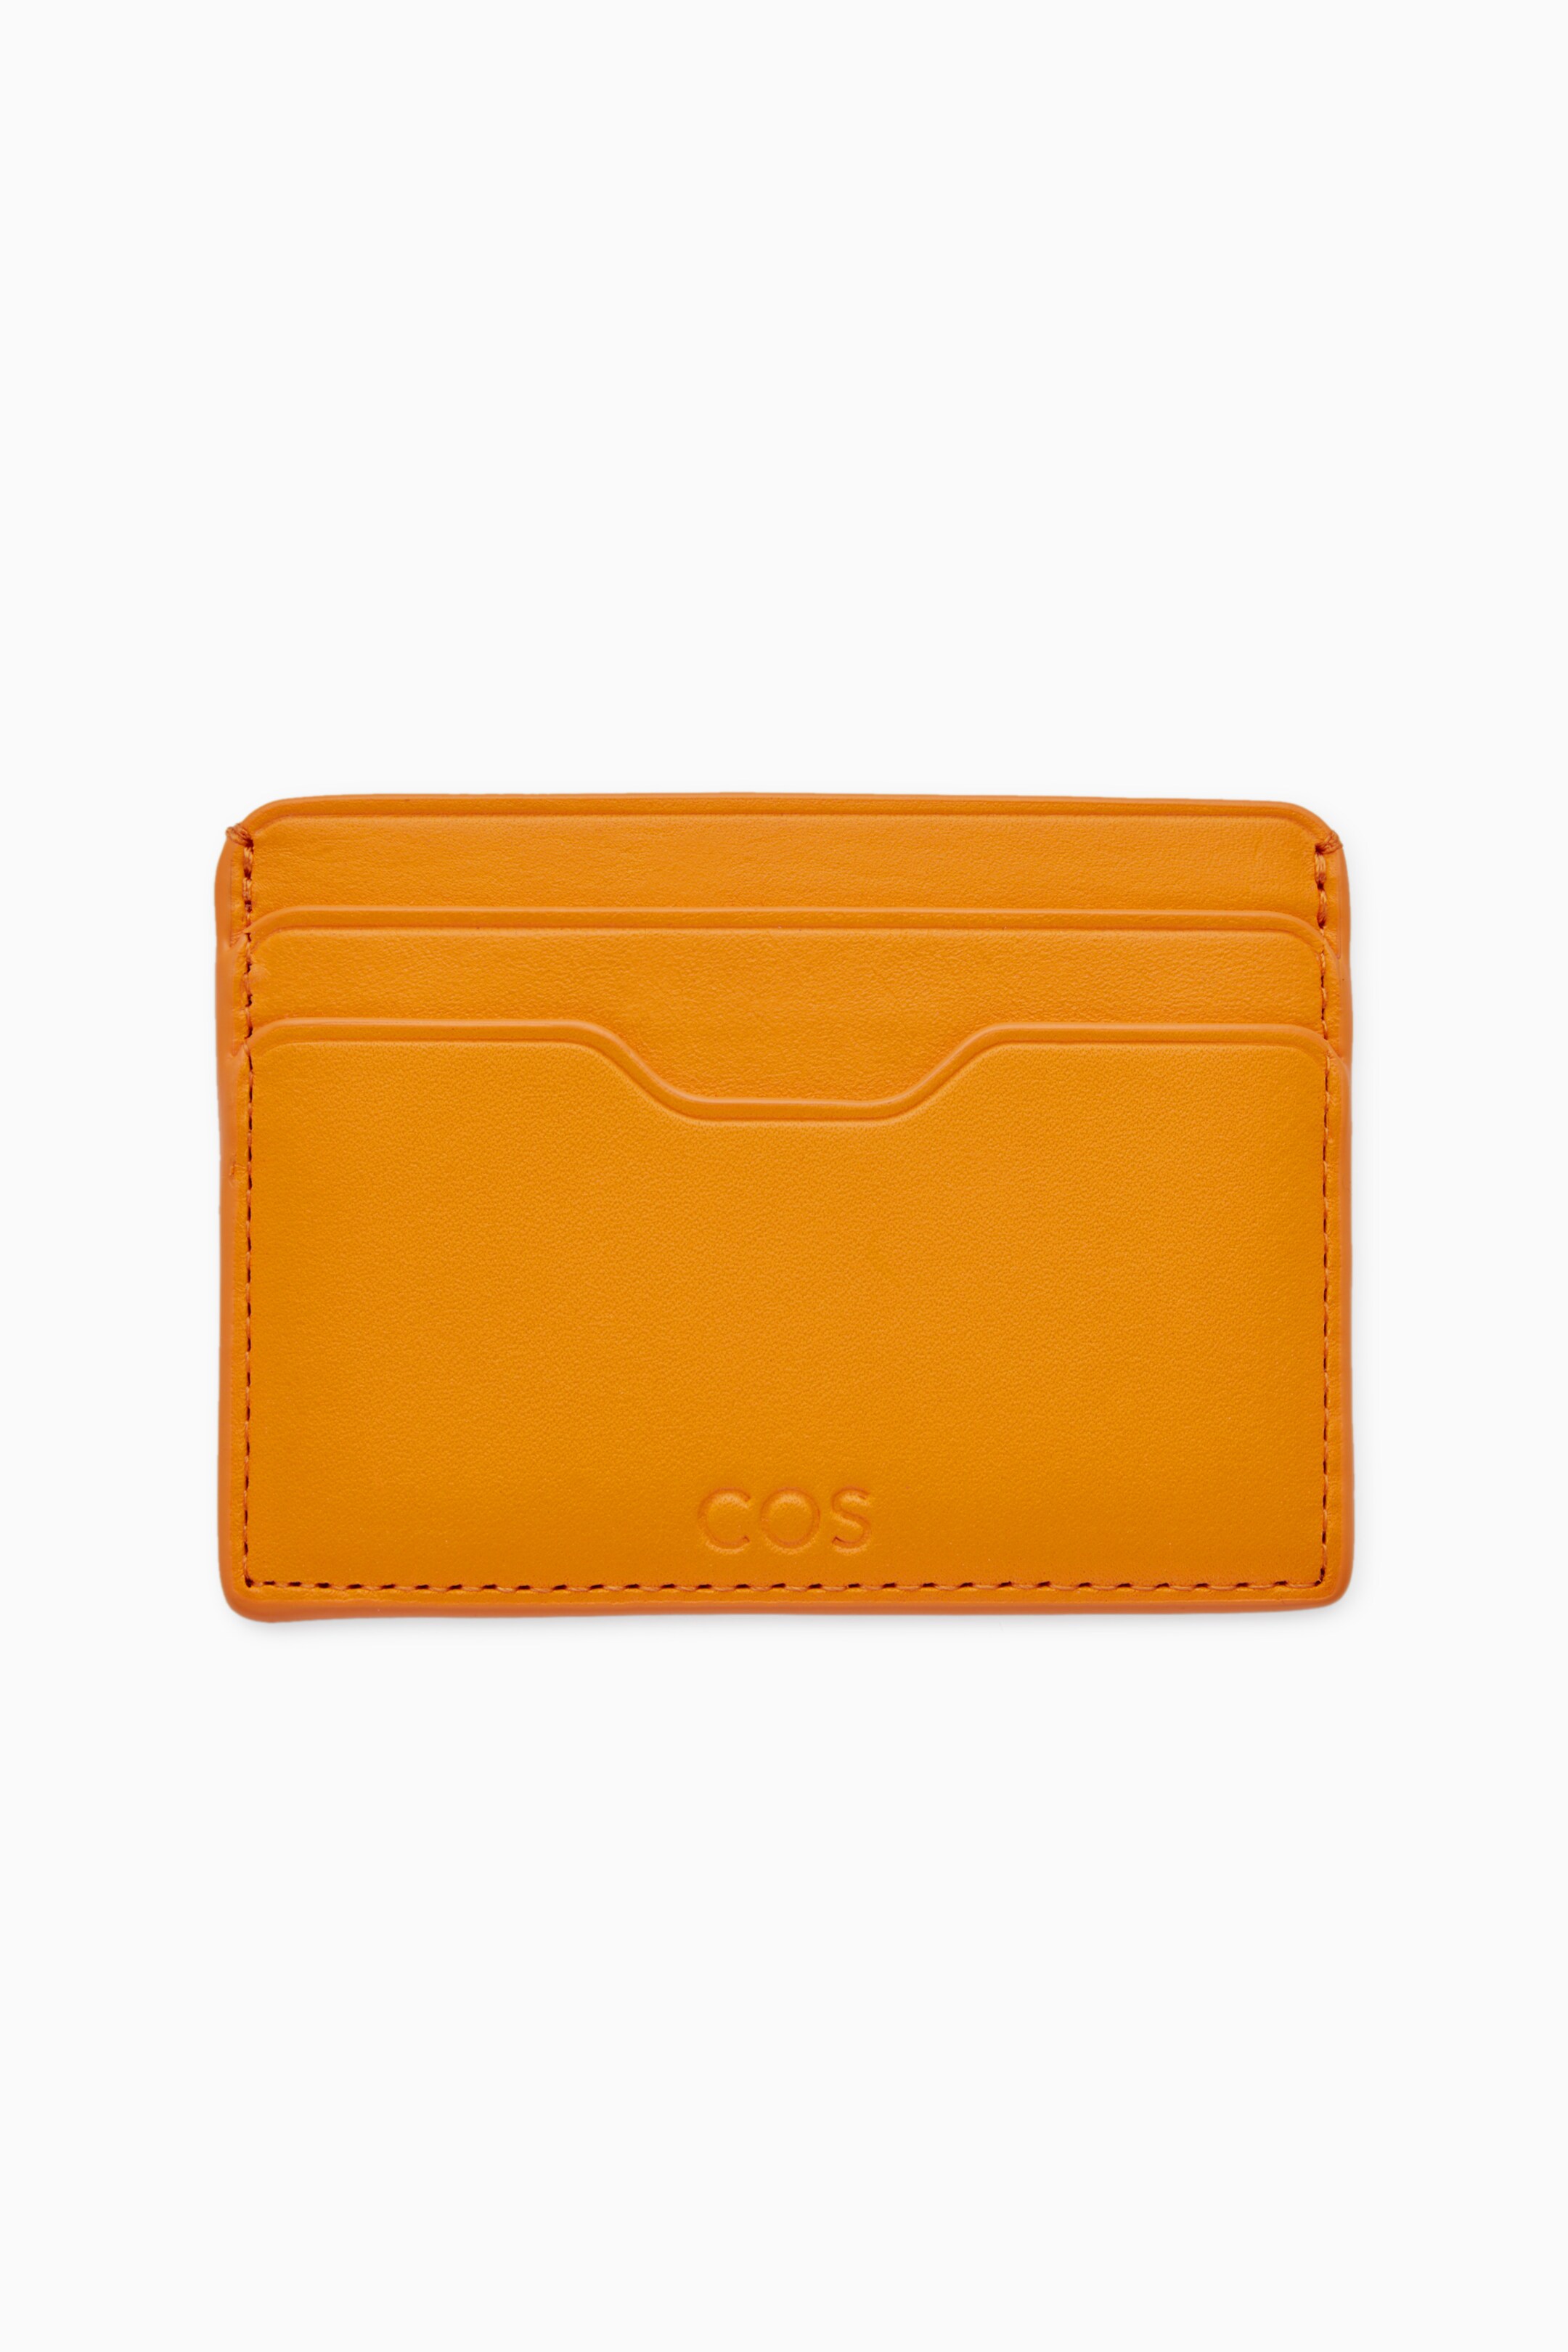 Front image of cos LEATHER CARD HOLDER in BRIGHT ORANGE